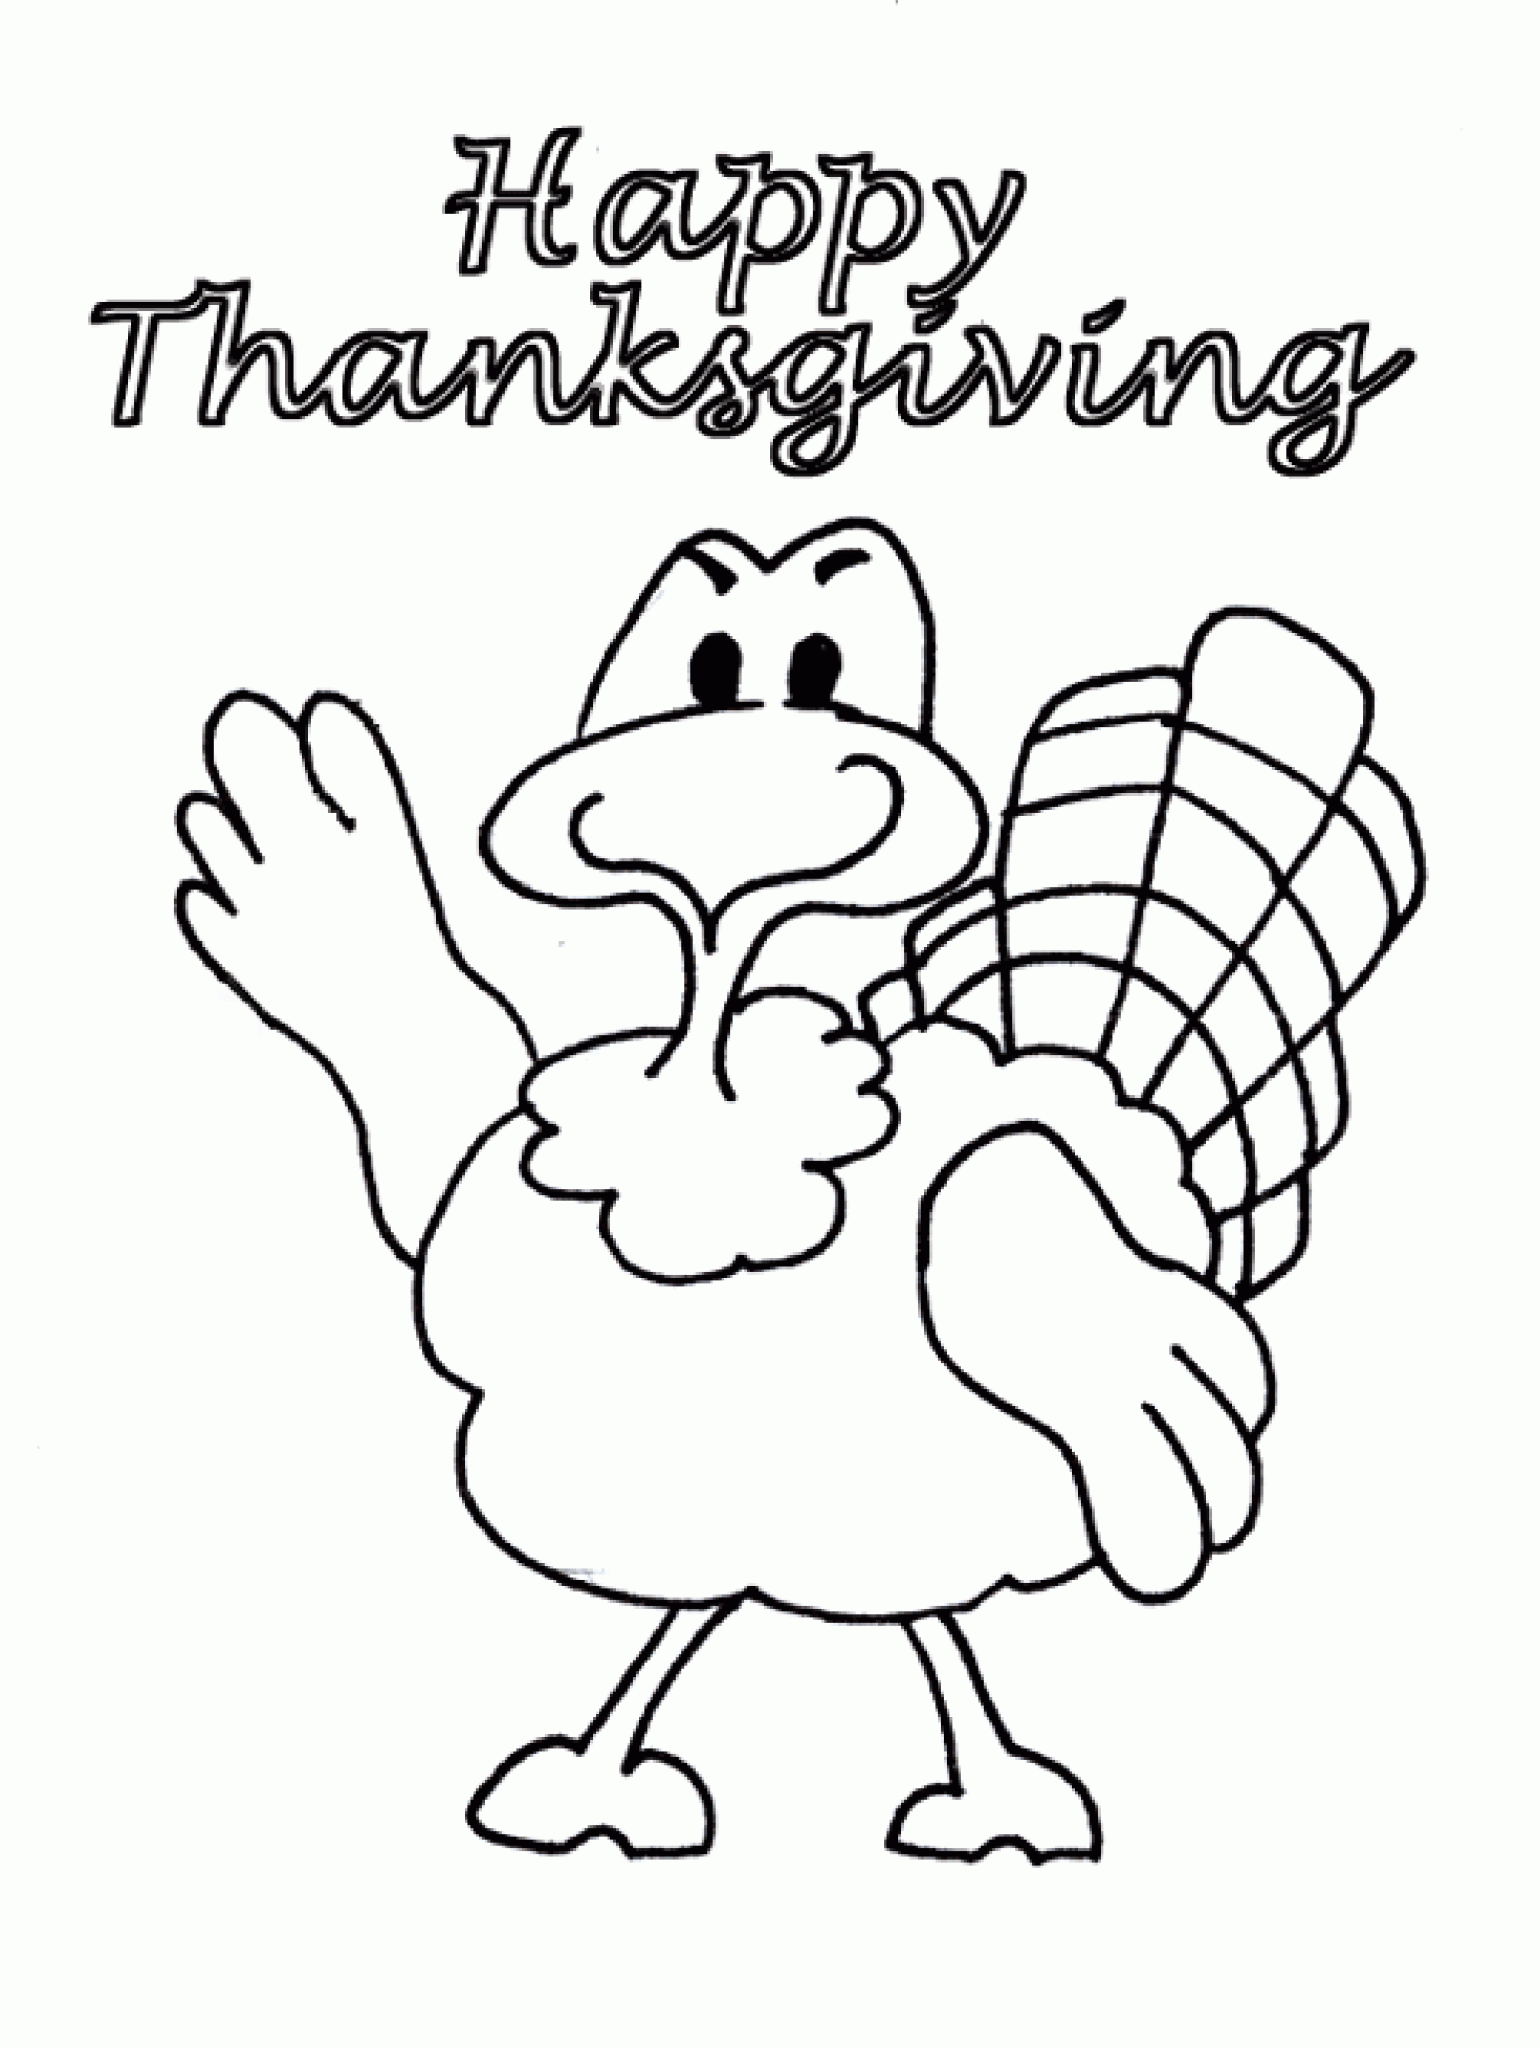 Gallery of Thanksgiving Coloring Pages Kids Love Drawing and Coloring